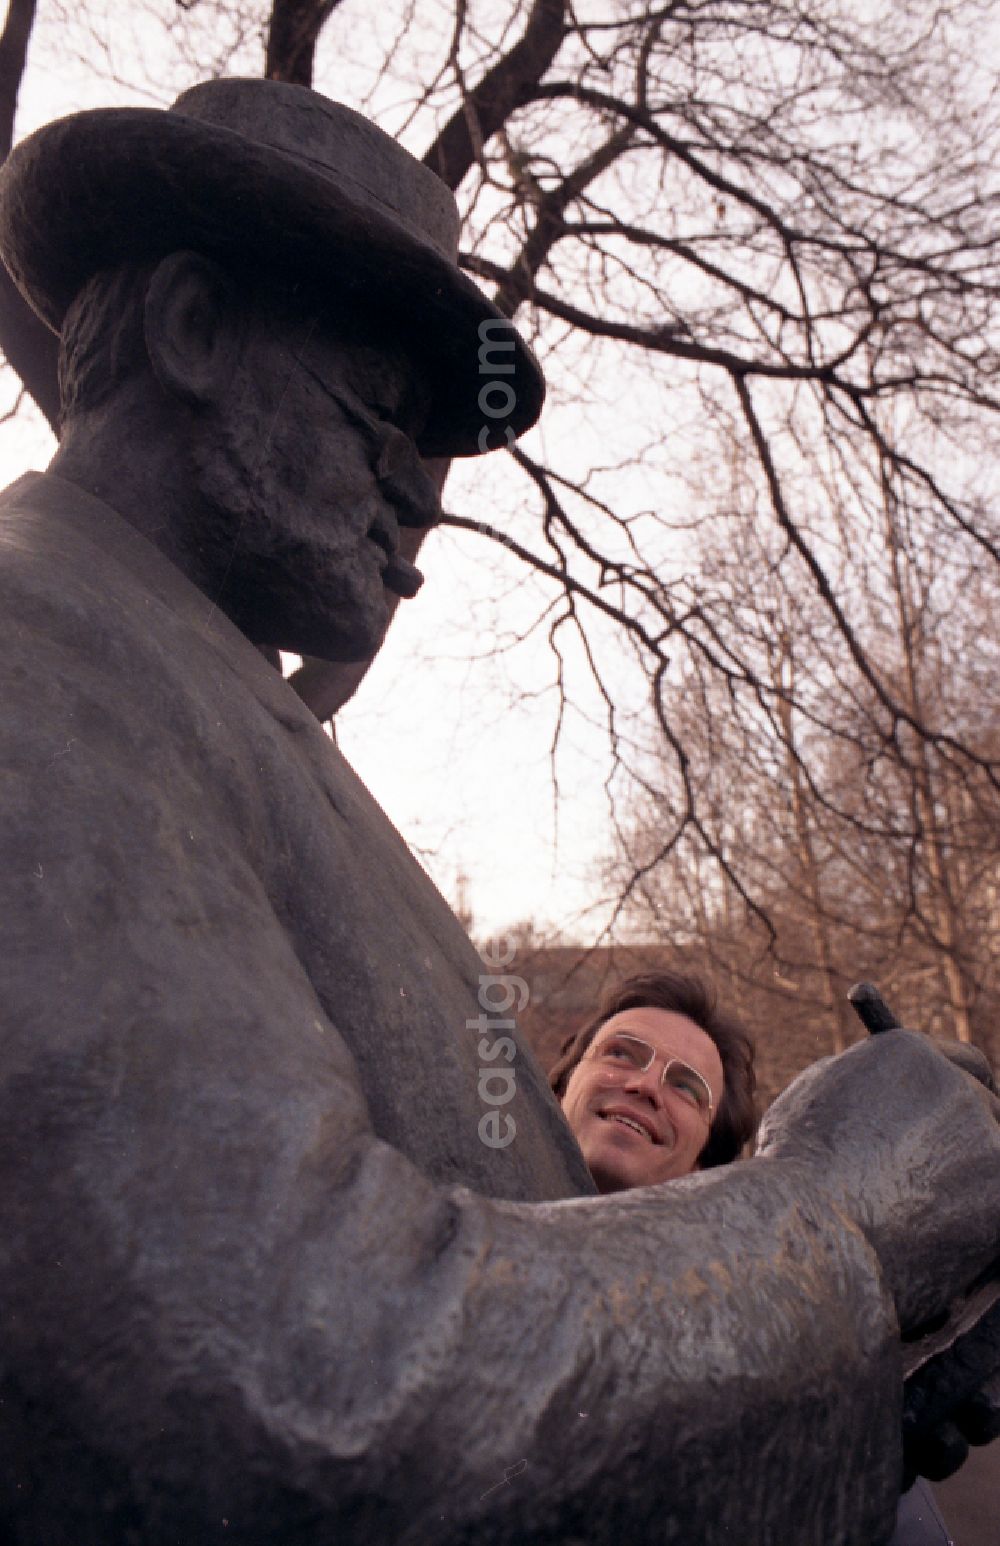 GDR photo archive: Berlin - Portrait of the musician and moderator Wolfgang Lippert in front of the Zille monument in the Koellnischer Park on Wallstrasse in the Mitte district of Berlin East Berlin in the area of the former GDR, German Democratic Republic